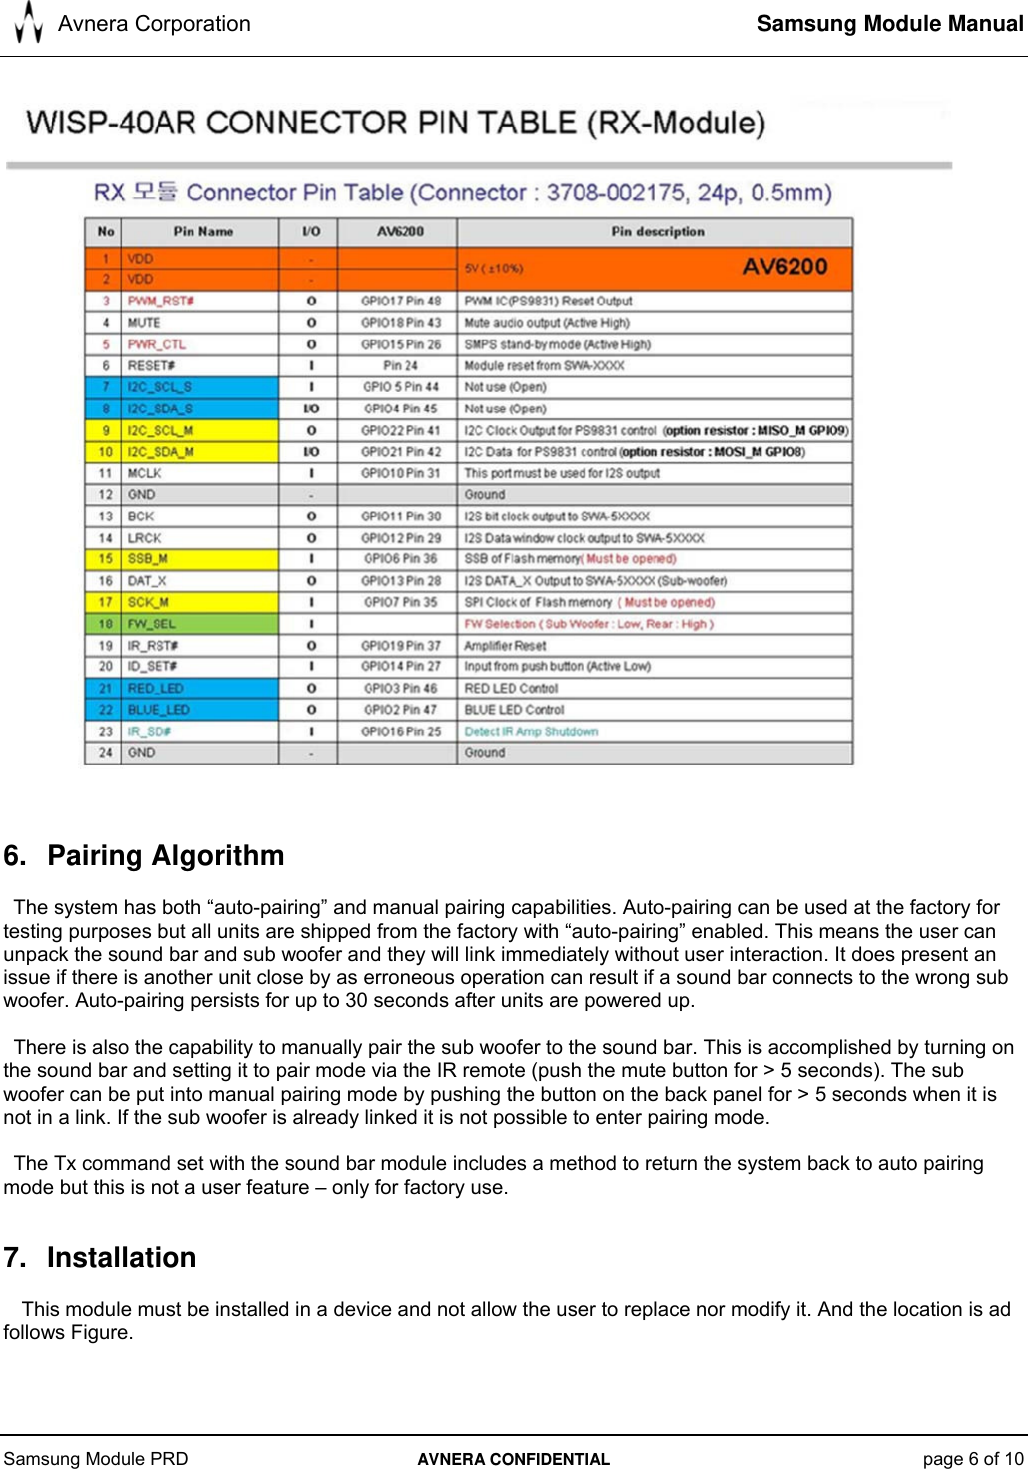 Avnera Corporation  Samsung Module Manual   Samsung Module PRD  AVNERA CONFIDENTIAL page 6 of 10    6. Pairing Algorithm The system has both “auto-pairing” and manual pairing capabilities. Auto-pairing can be used at the factory for testing purposes but all units are shipped from the factory with “auto-pairing” enabled. This means the user can unpack the sound bar and sub woofer and they will link immediately without user interaction. It does present an issue if there is another unit close by as erroneous operation can result if a sound bar connects to the wrong sub woofer. Auto-pairing persists for up to 30 seconds after units are powered up.  There is also the capability to manually pair the sub woofer to the sound bar. This is accomplished by turning on the sound bar and setting it to pair mode via the IR remote (push the mute button for &gt; 5 seconds). The sub woofer can be put into manual pairing mode by pushing the button on the back panel for &gt; 5 seconds when it is not in a link. If the sub woofer is already linked it is not possible to enter pairing mode.  The Tx command set with the sound bar module includes a method to return the system back to auto pairing mode but this is not a user feature – only for factory use.   7. Installation  This module must be installed in a device and not allow the user to replace nor modify it. And the location is ad follows Figure. 